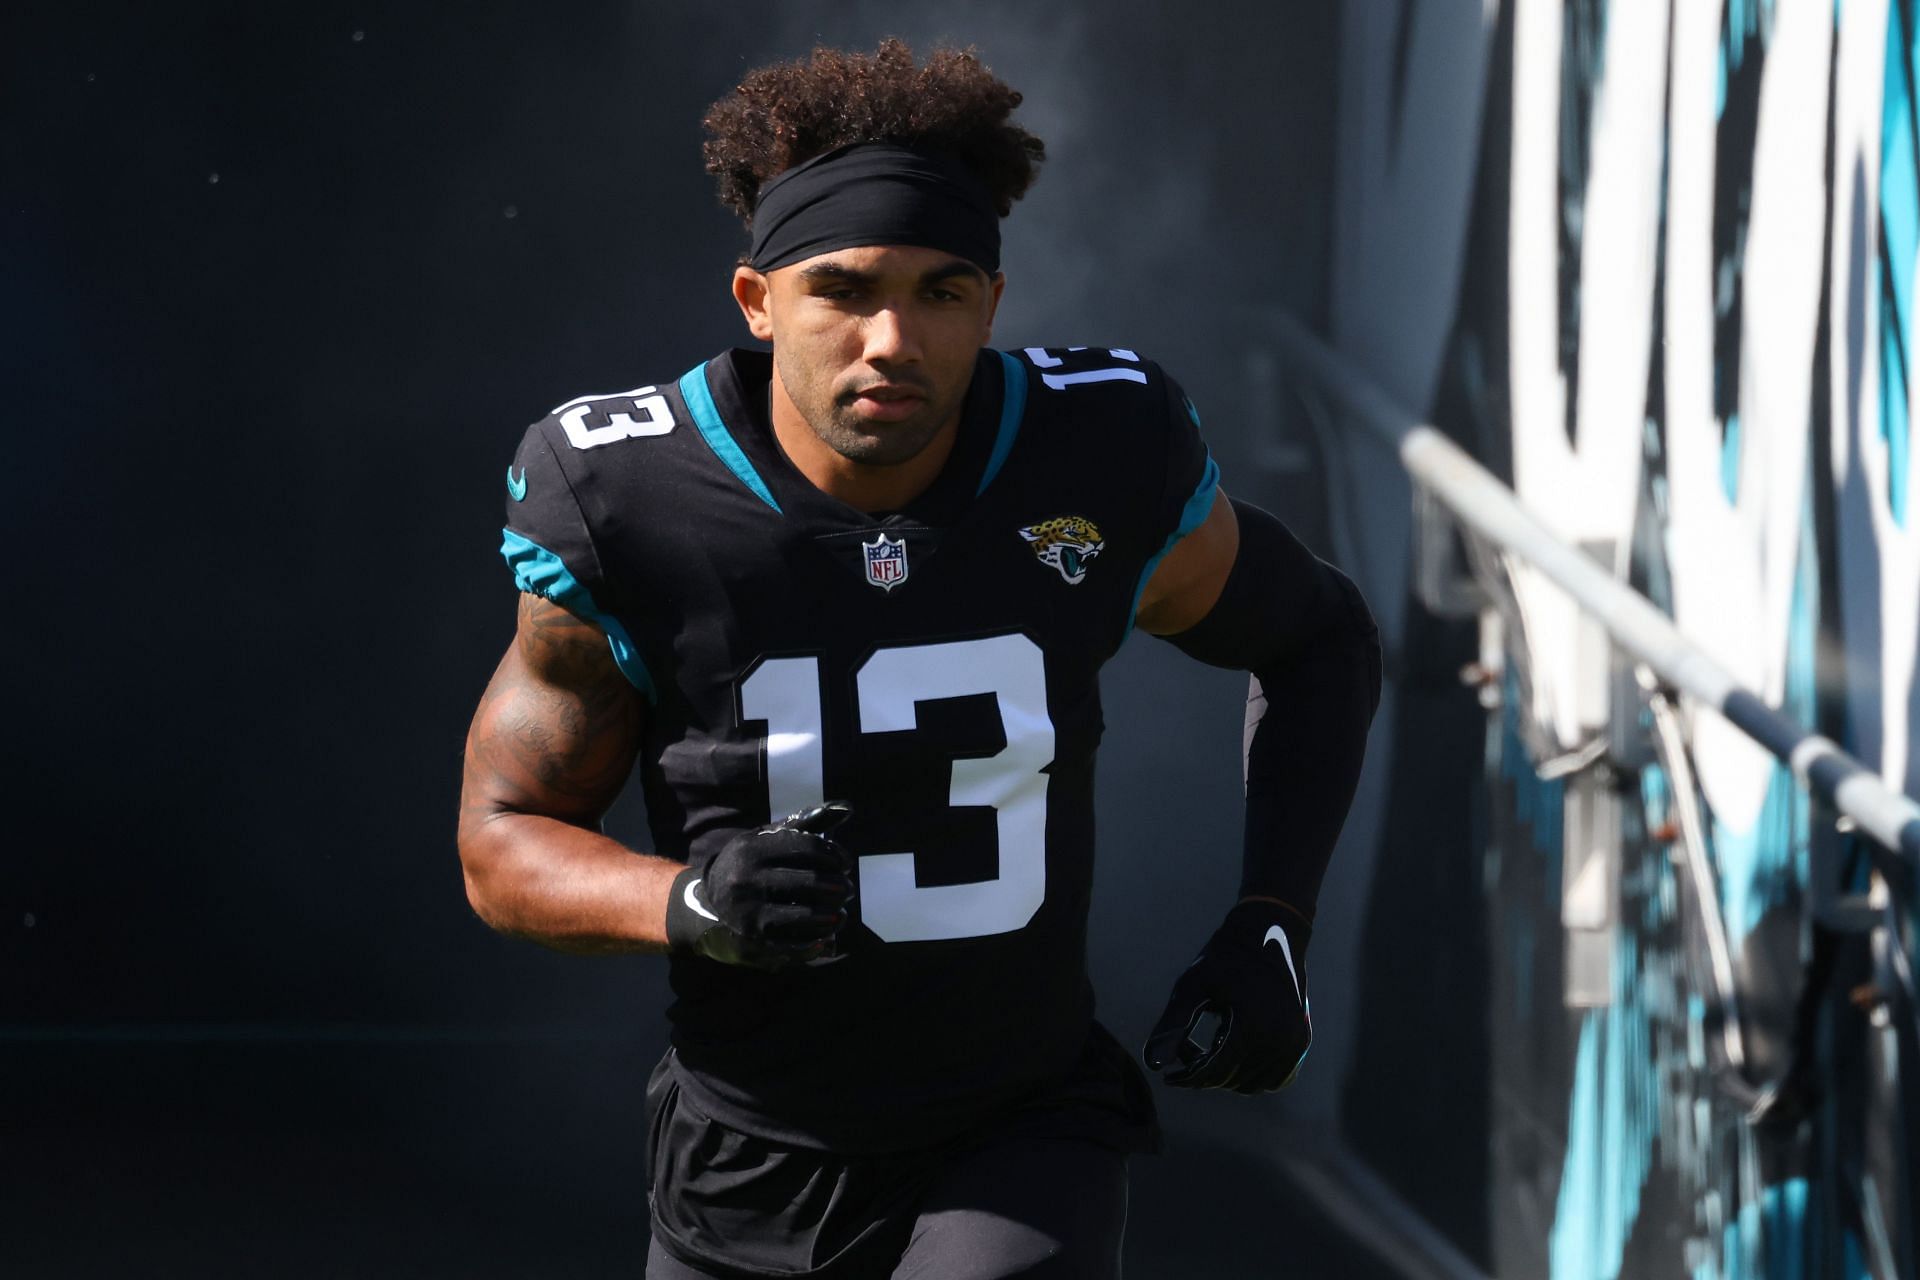 The Jaguars are giving former Cardinals WR Christian Kirk a 4-year